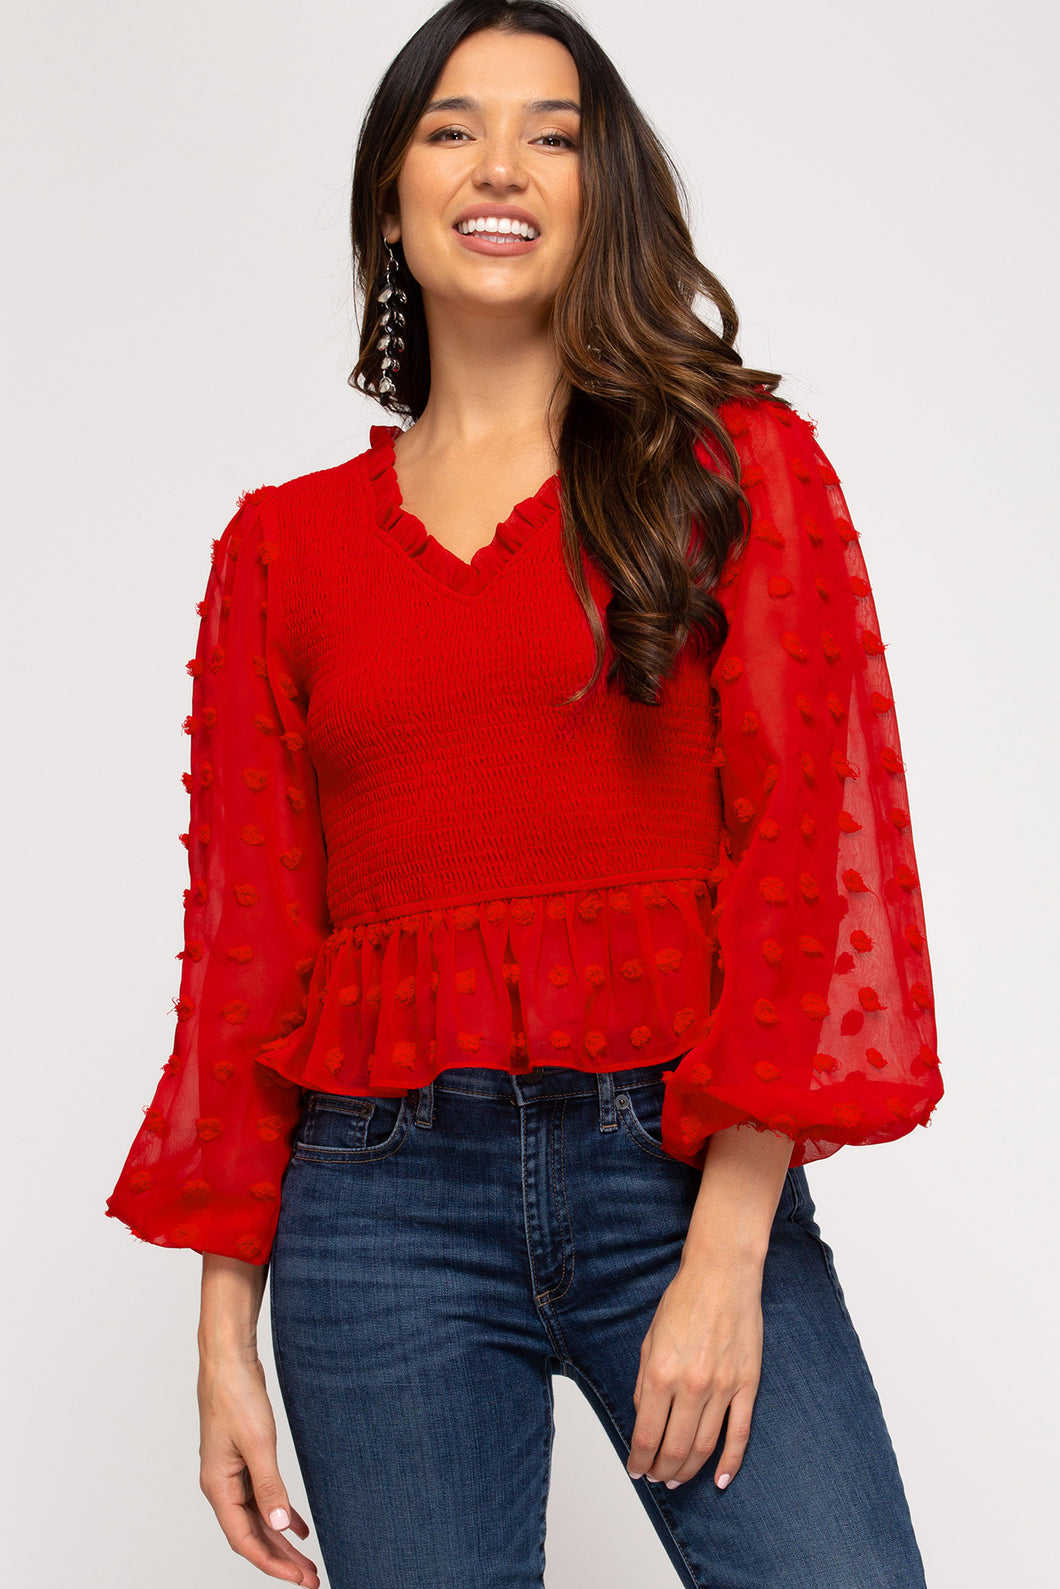 Be My Valentine Top - Red